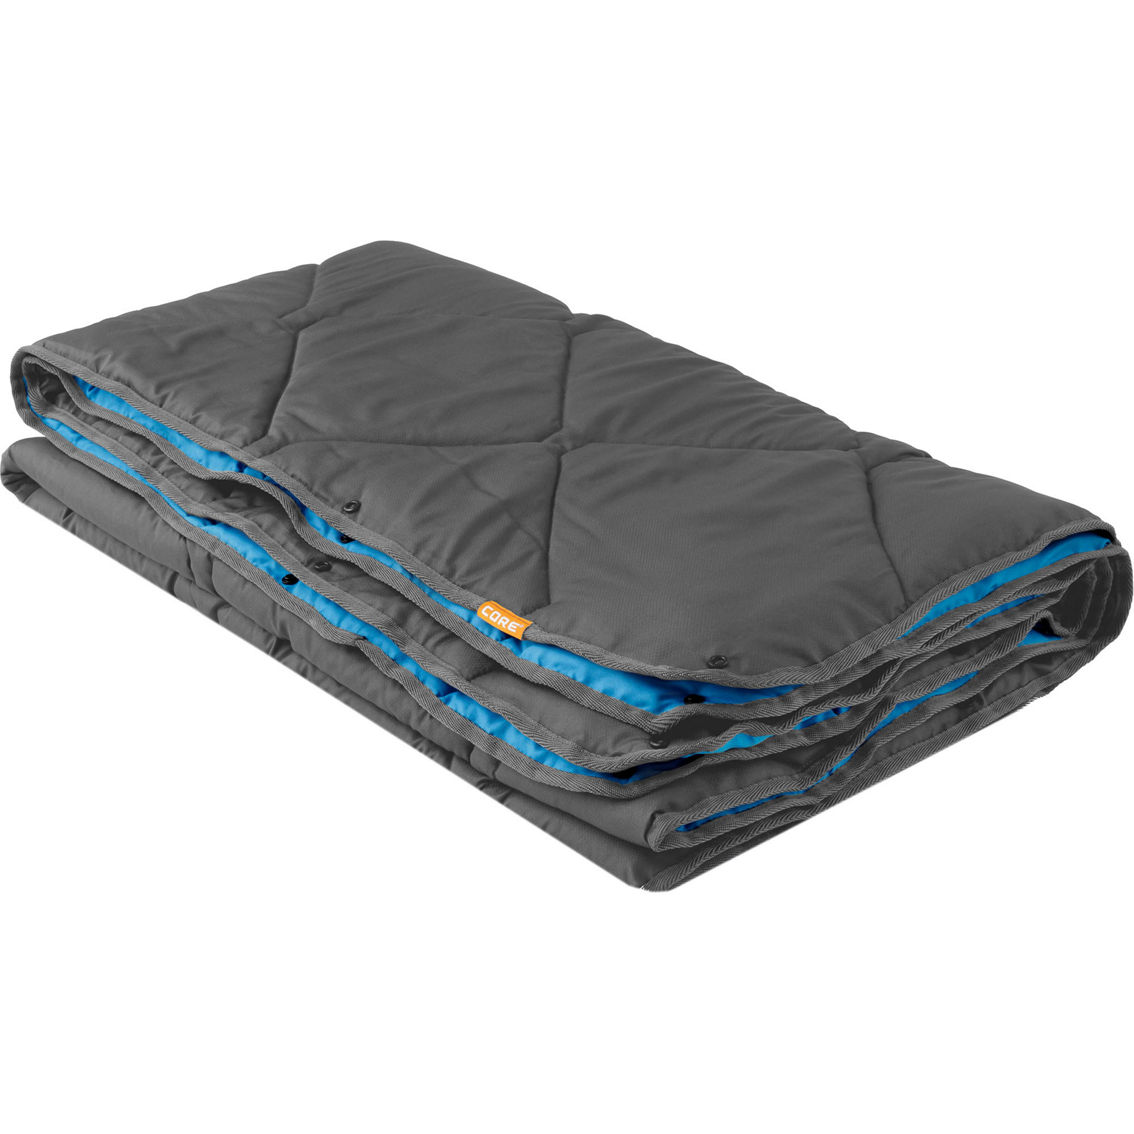 Core Equipment Wearable Camp Blanket - Image 4 of 4